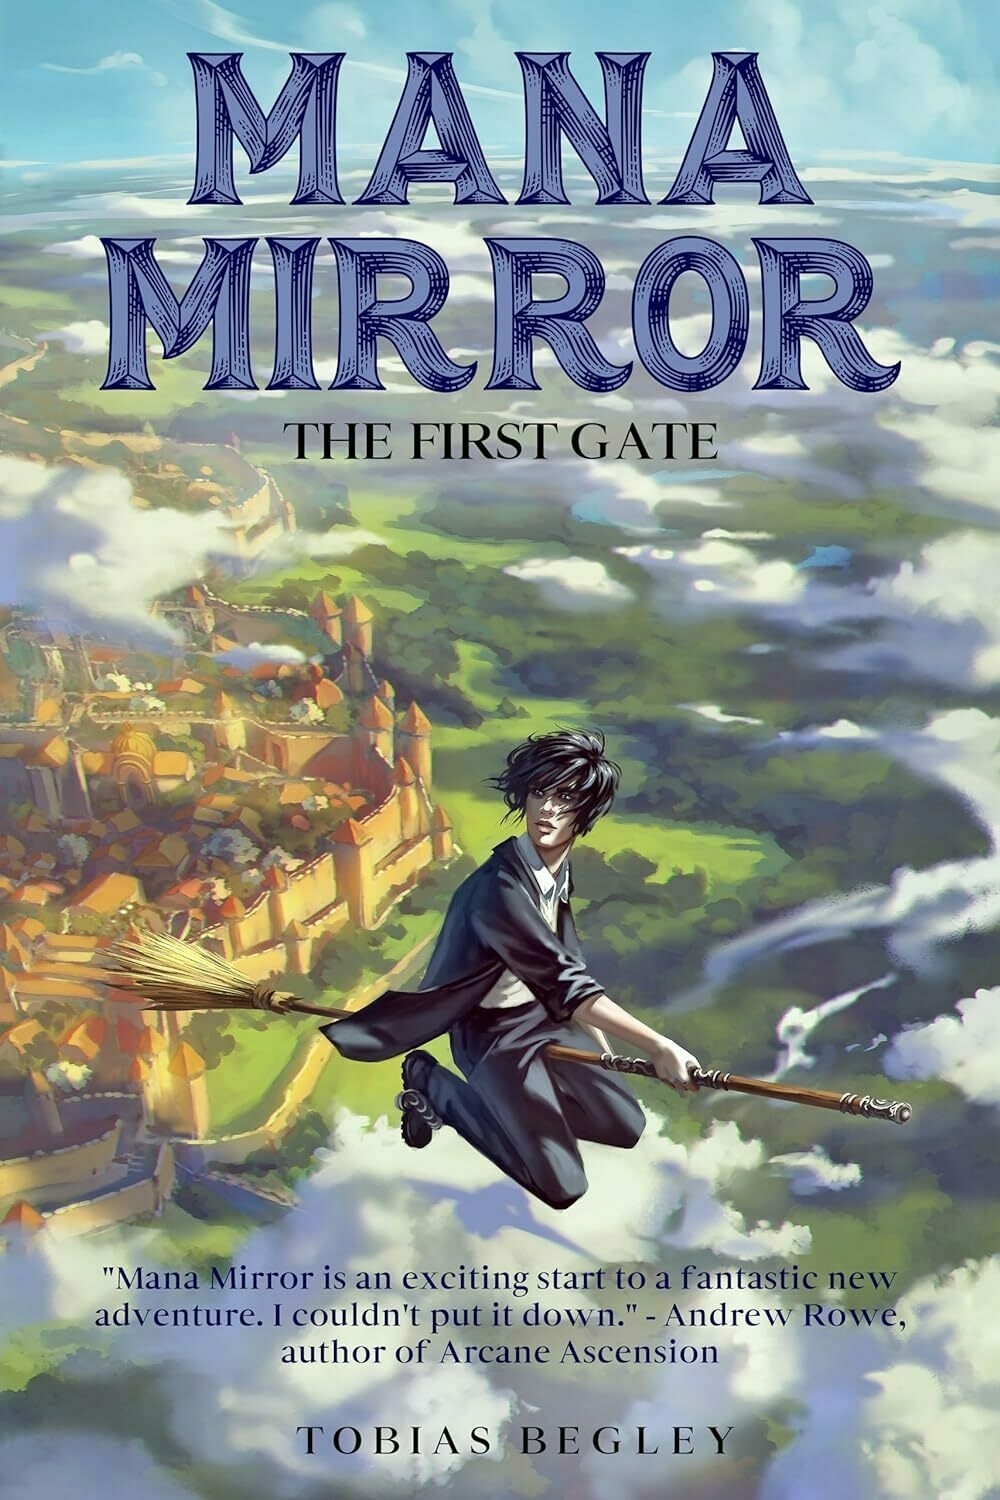 A person rides a broom over a fantastical landscape of clouds and a sprawling city. Text: 'MANA MIRROR THE FIRST GATE', 'Mana Mirror is an exciting start to a fantastic new adventure. I couldn't put it down.' - Andrew Rowe, author of Arcane Ascension, TOBIAS BEGLEY.